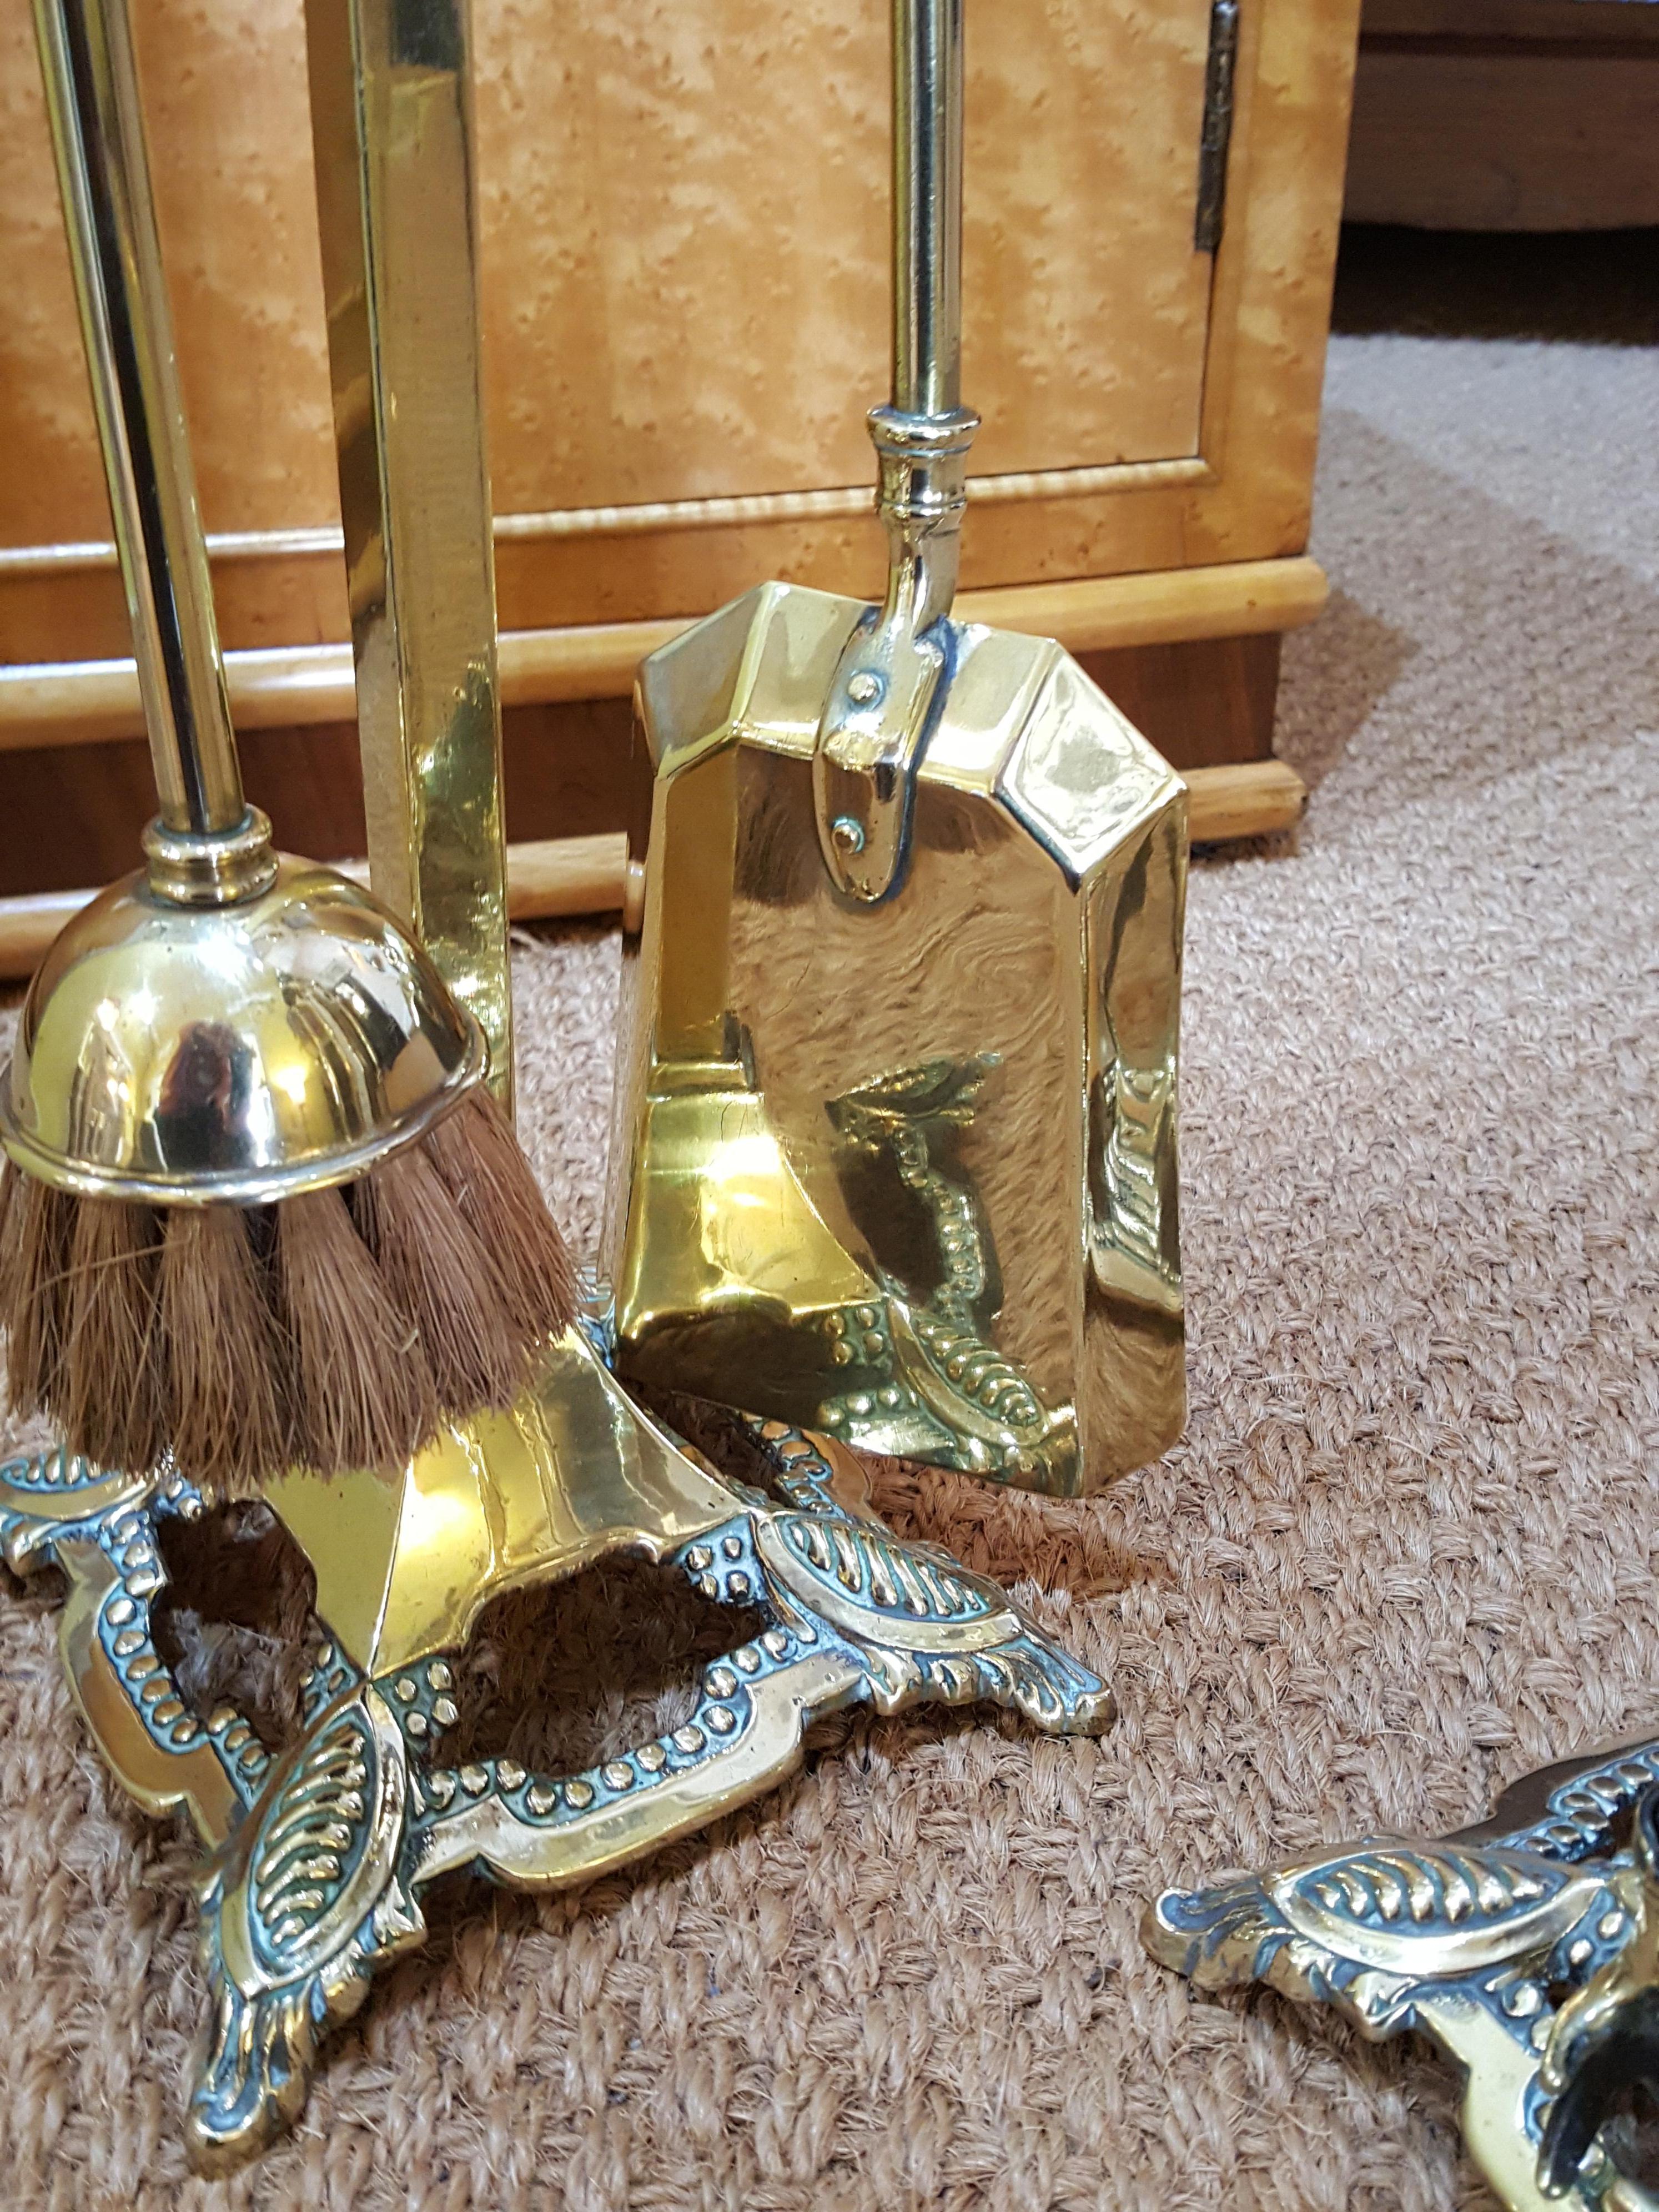 Pair of Edwardian brass fire side companions with brush, shovel, coal tongs and poker, measures: 6